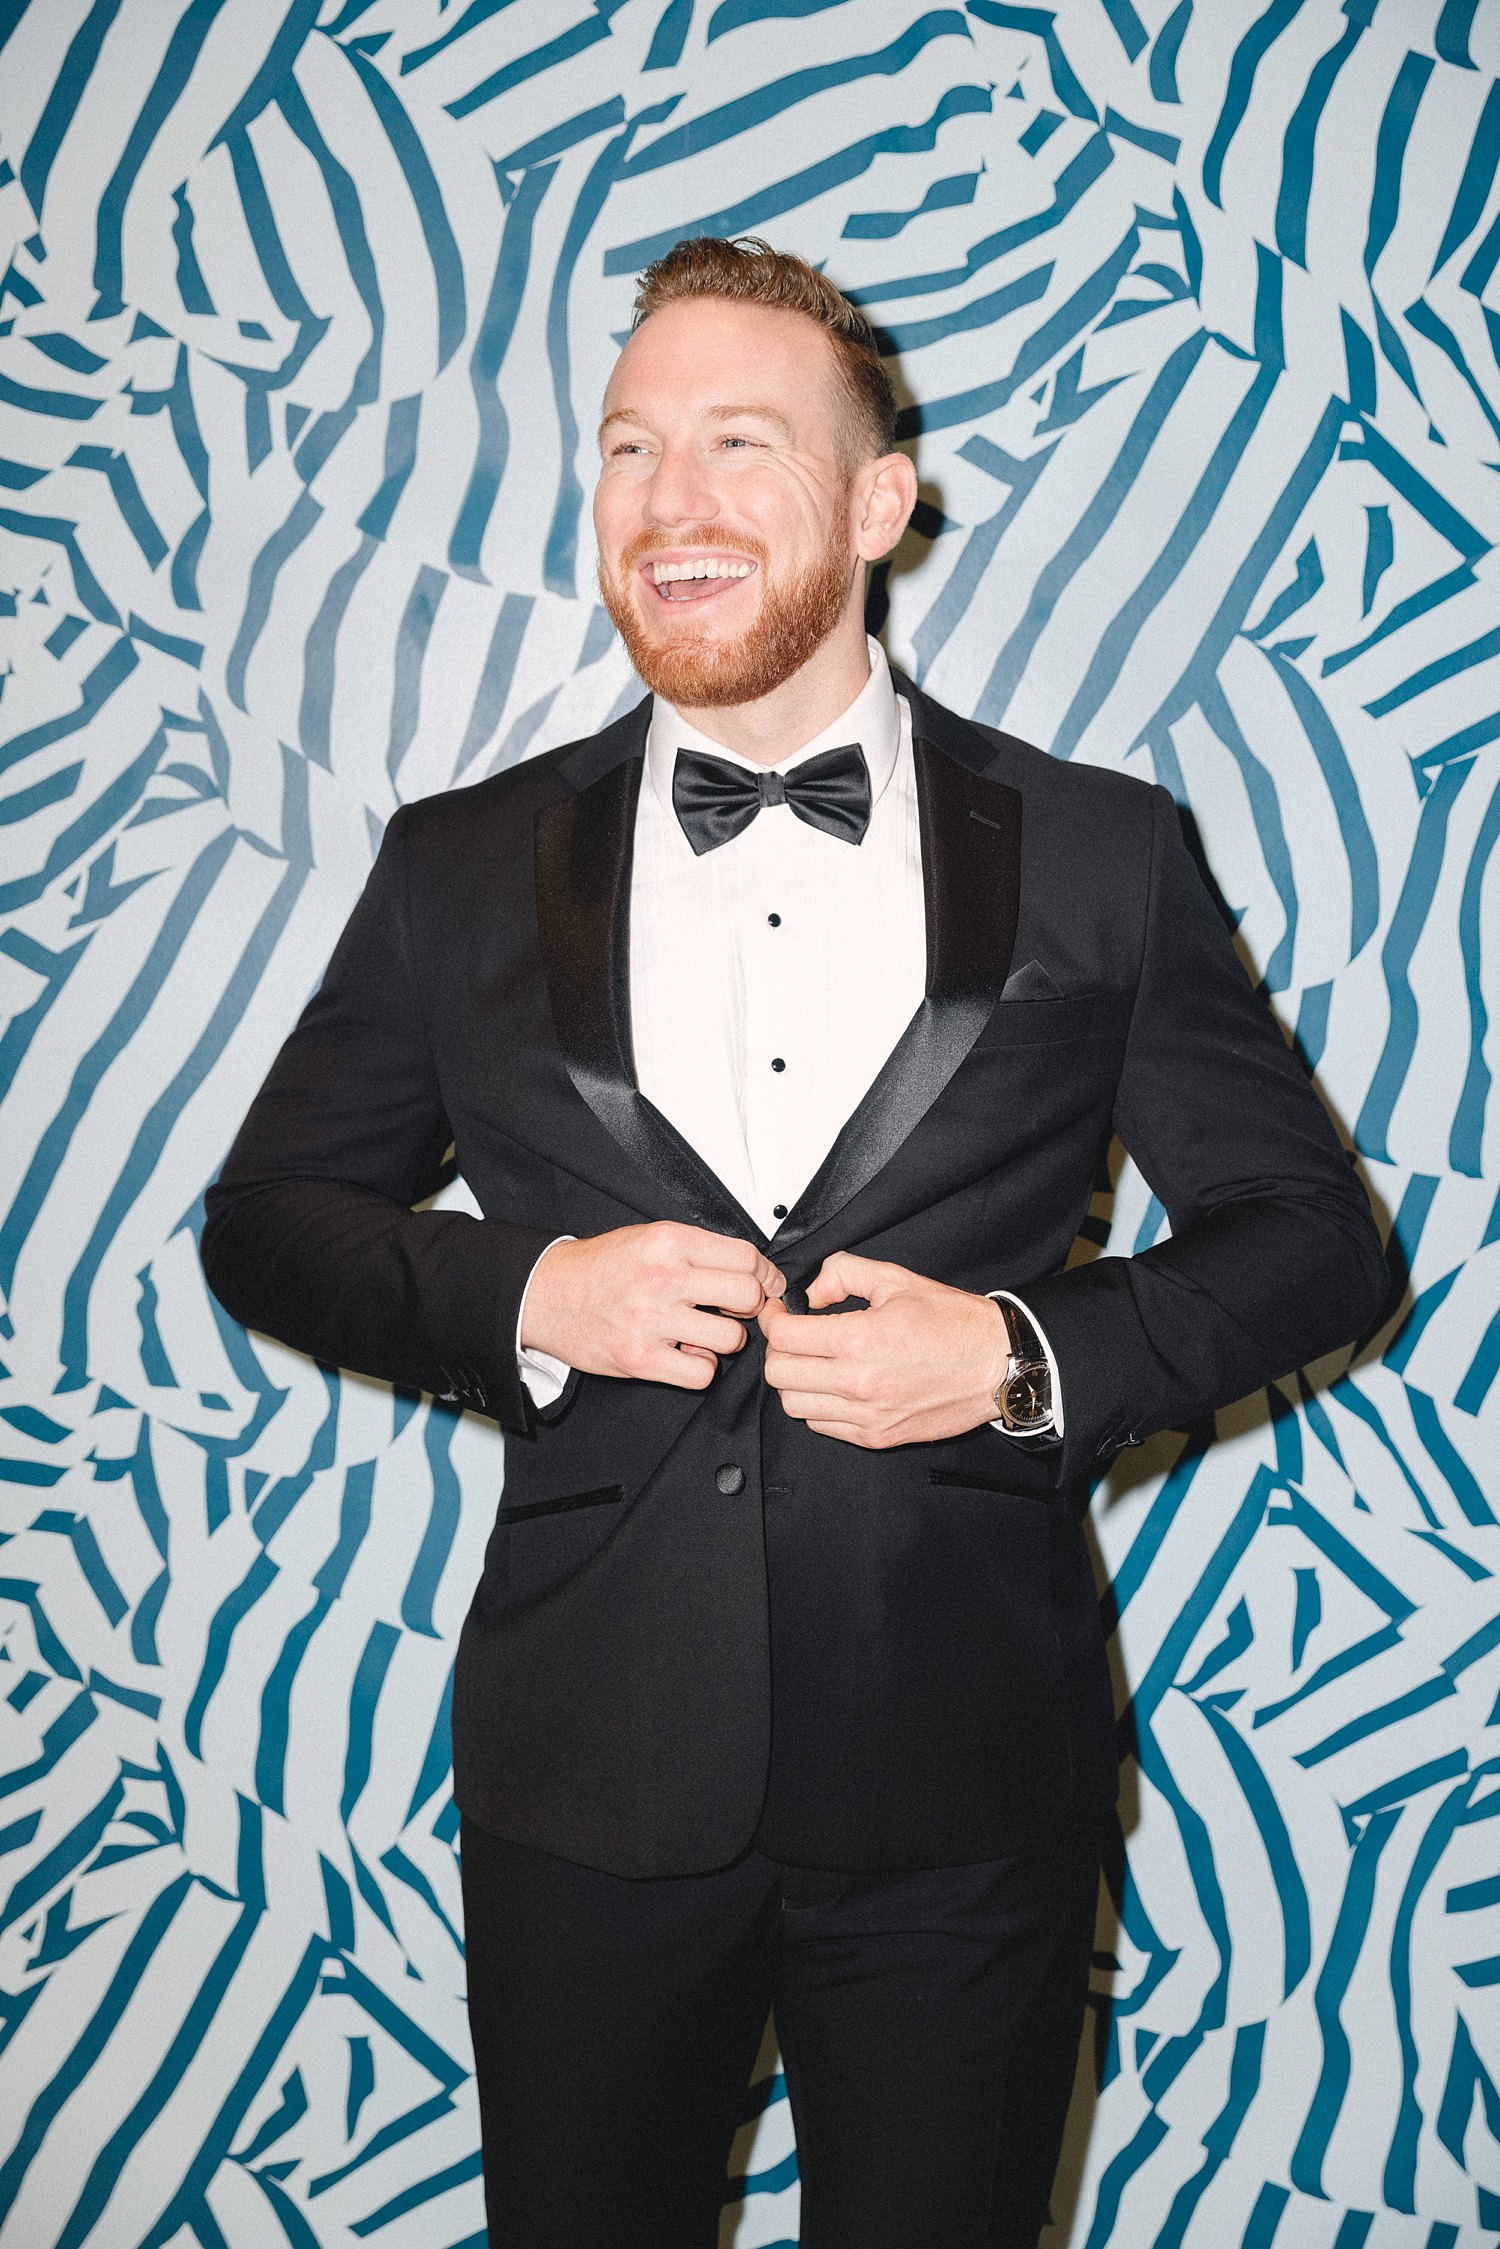 man in black tuxedo laughing in front of blue and white striped wall